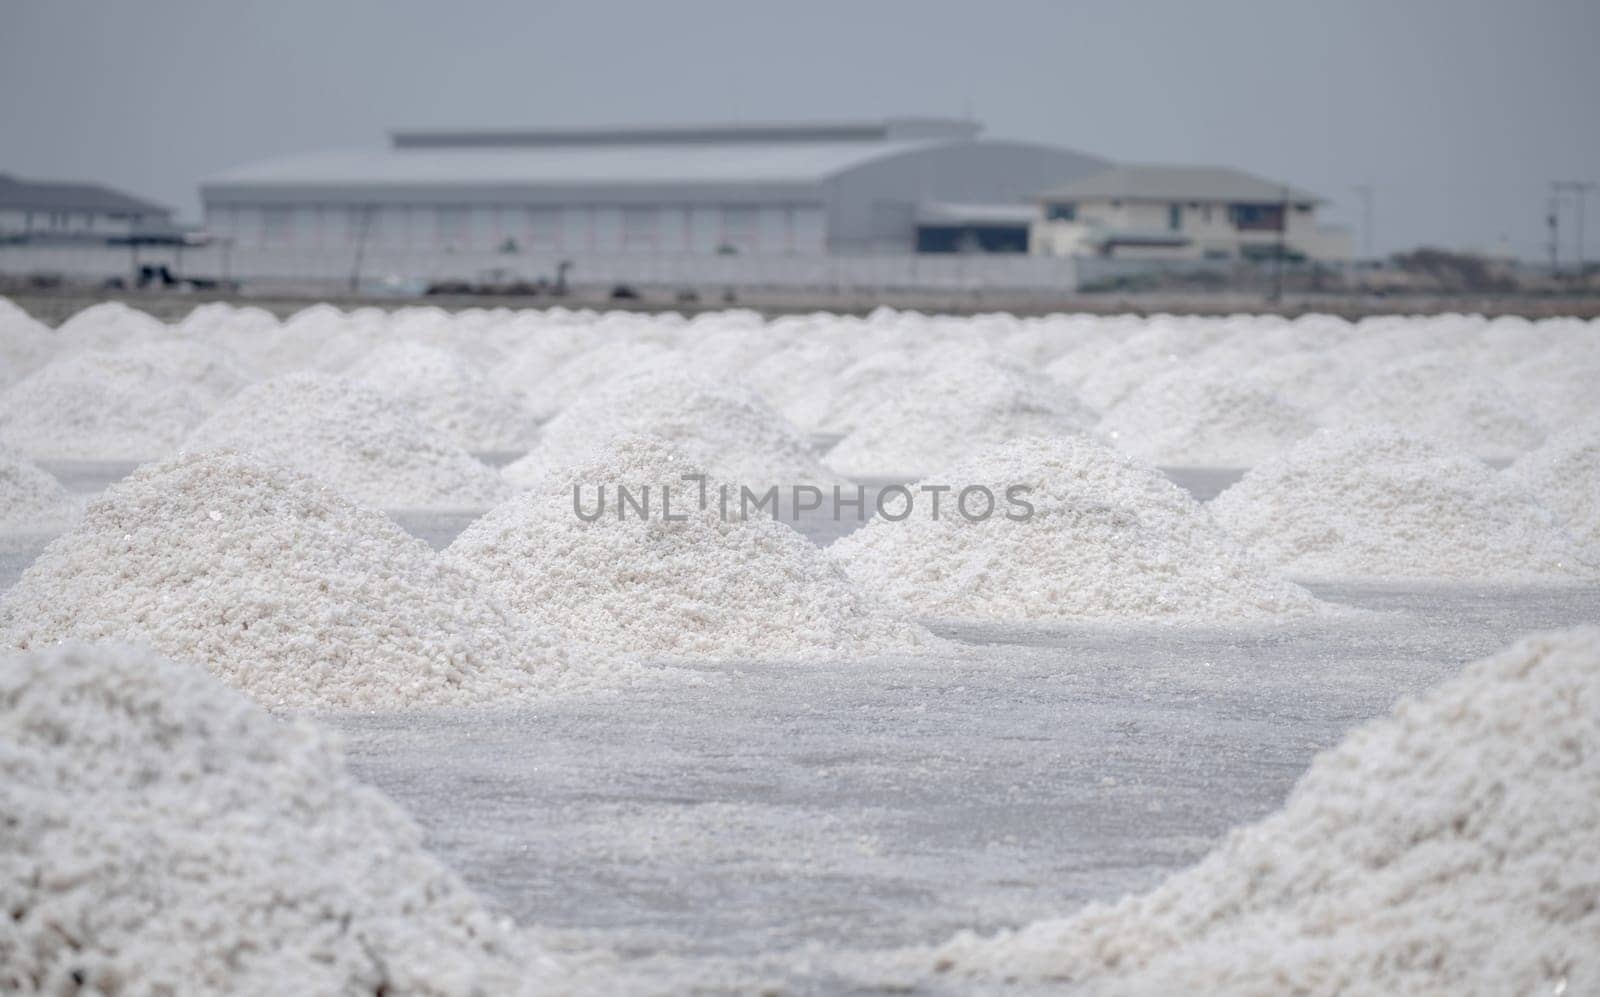 Sea salt farm. Pile of brine salt. Raw material of salt industrial. Sodium Chloride mineral. Evaporation and crystallization of sea water. White salt harvesting. Agriculture industry. Traditional farm by Fahroni